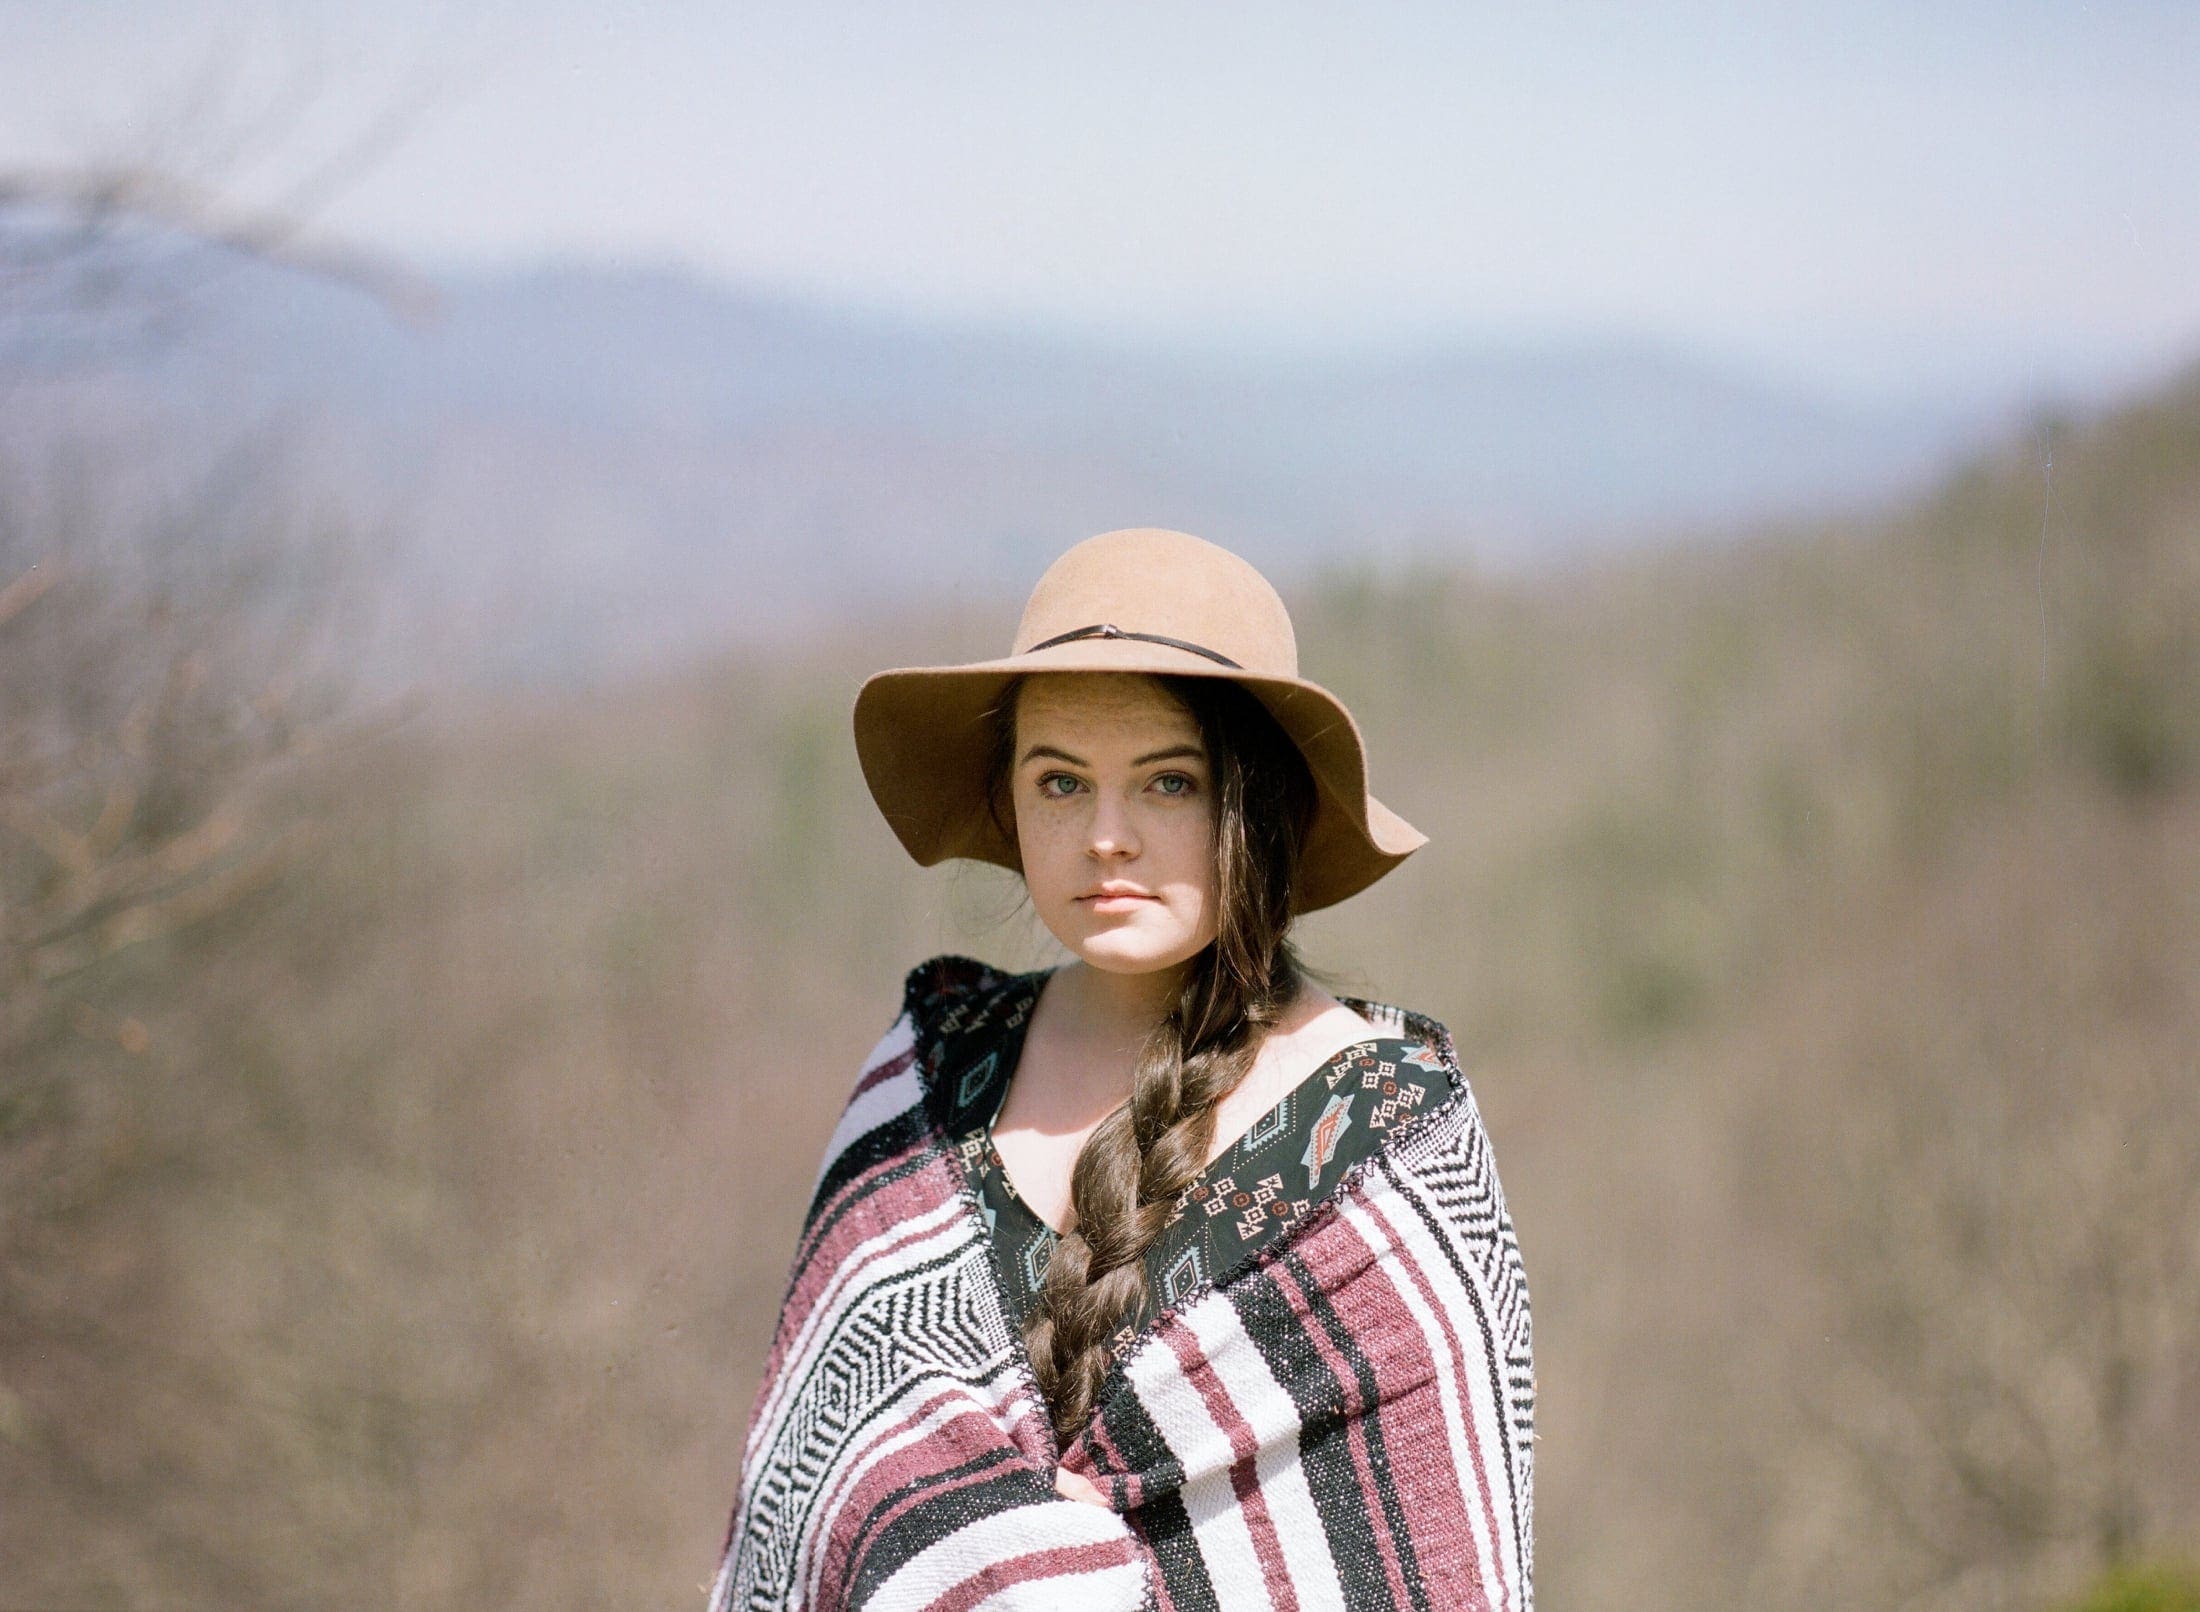 Film-Portra 400, Asheville Film Photography, Blue Ridge Parkway, teen in hat with hair braided, boho blanket, Blue Ride Mountains, Headshot